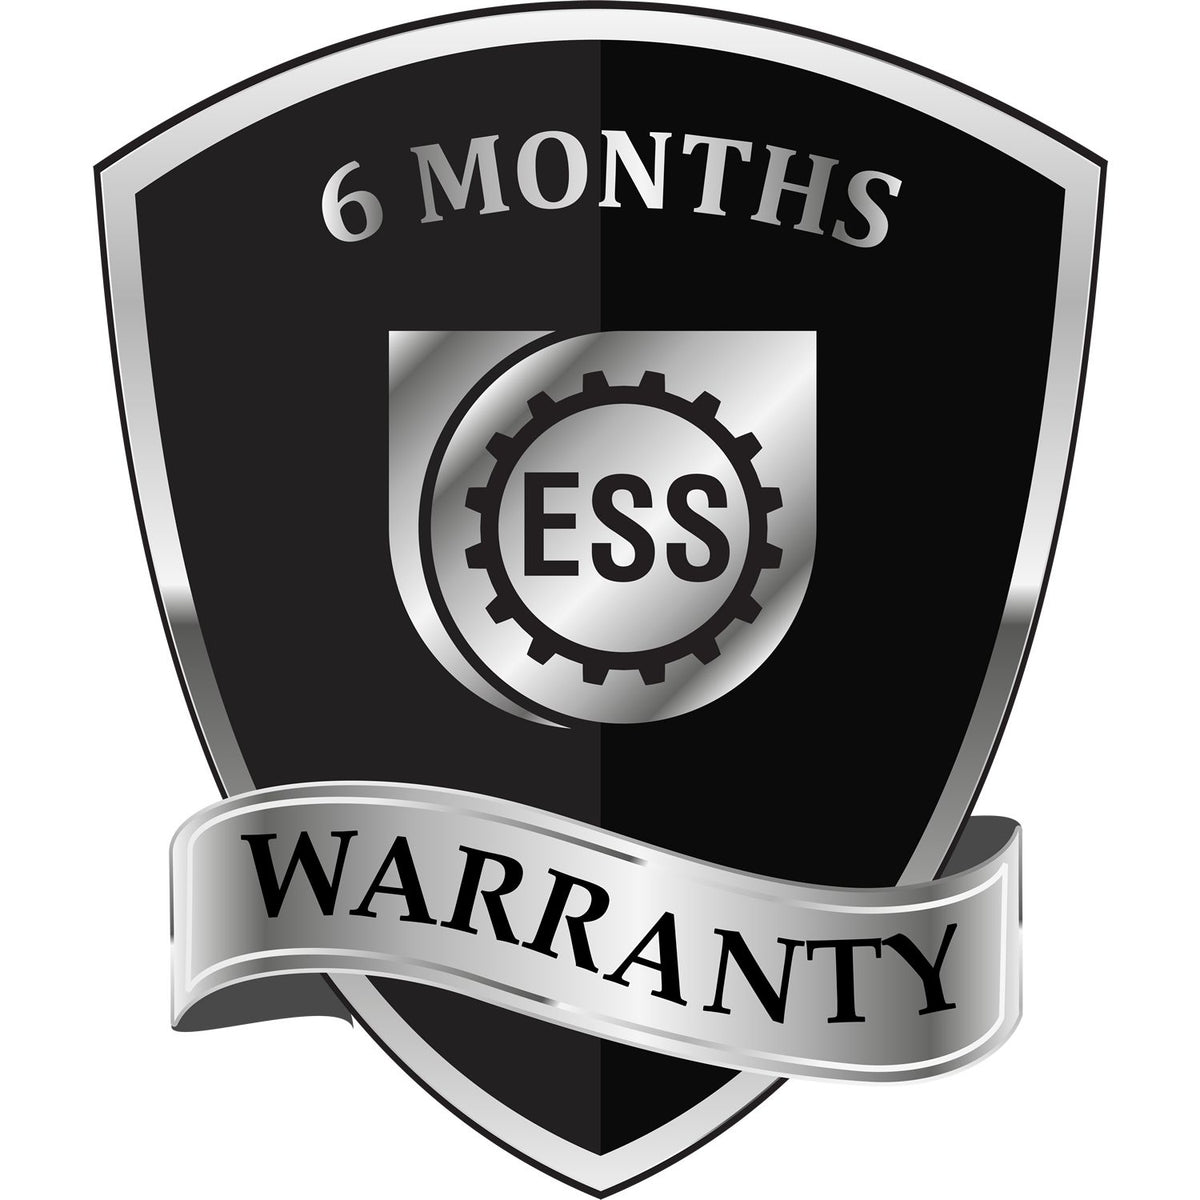 A badge or emblem showing a warranty icon for the Heavy-Duty Washington Rectangular Notary Stamp